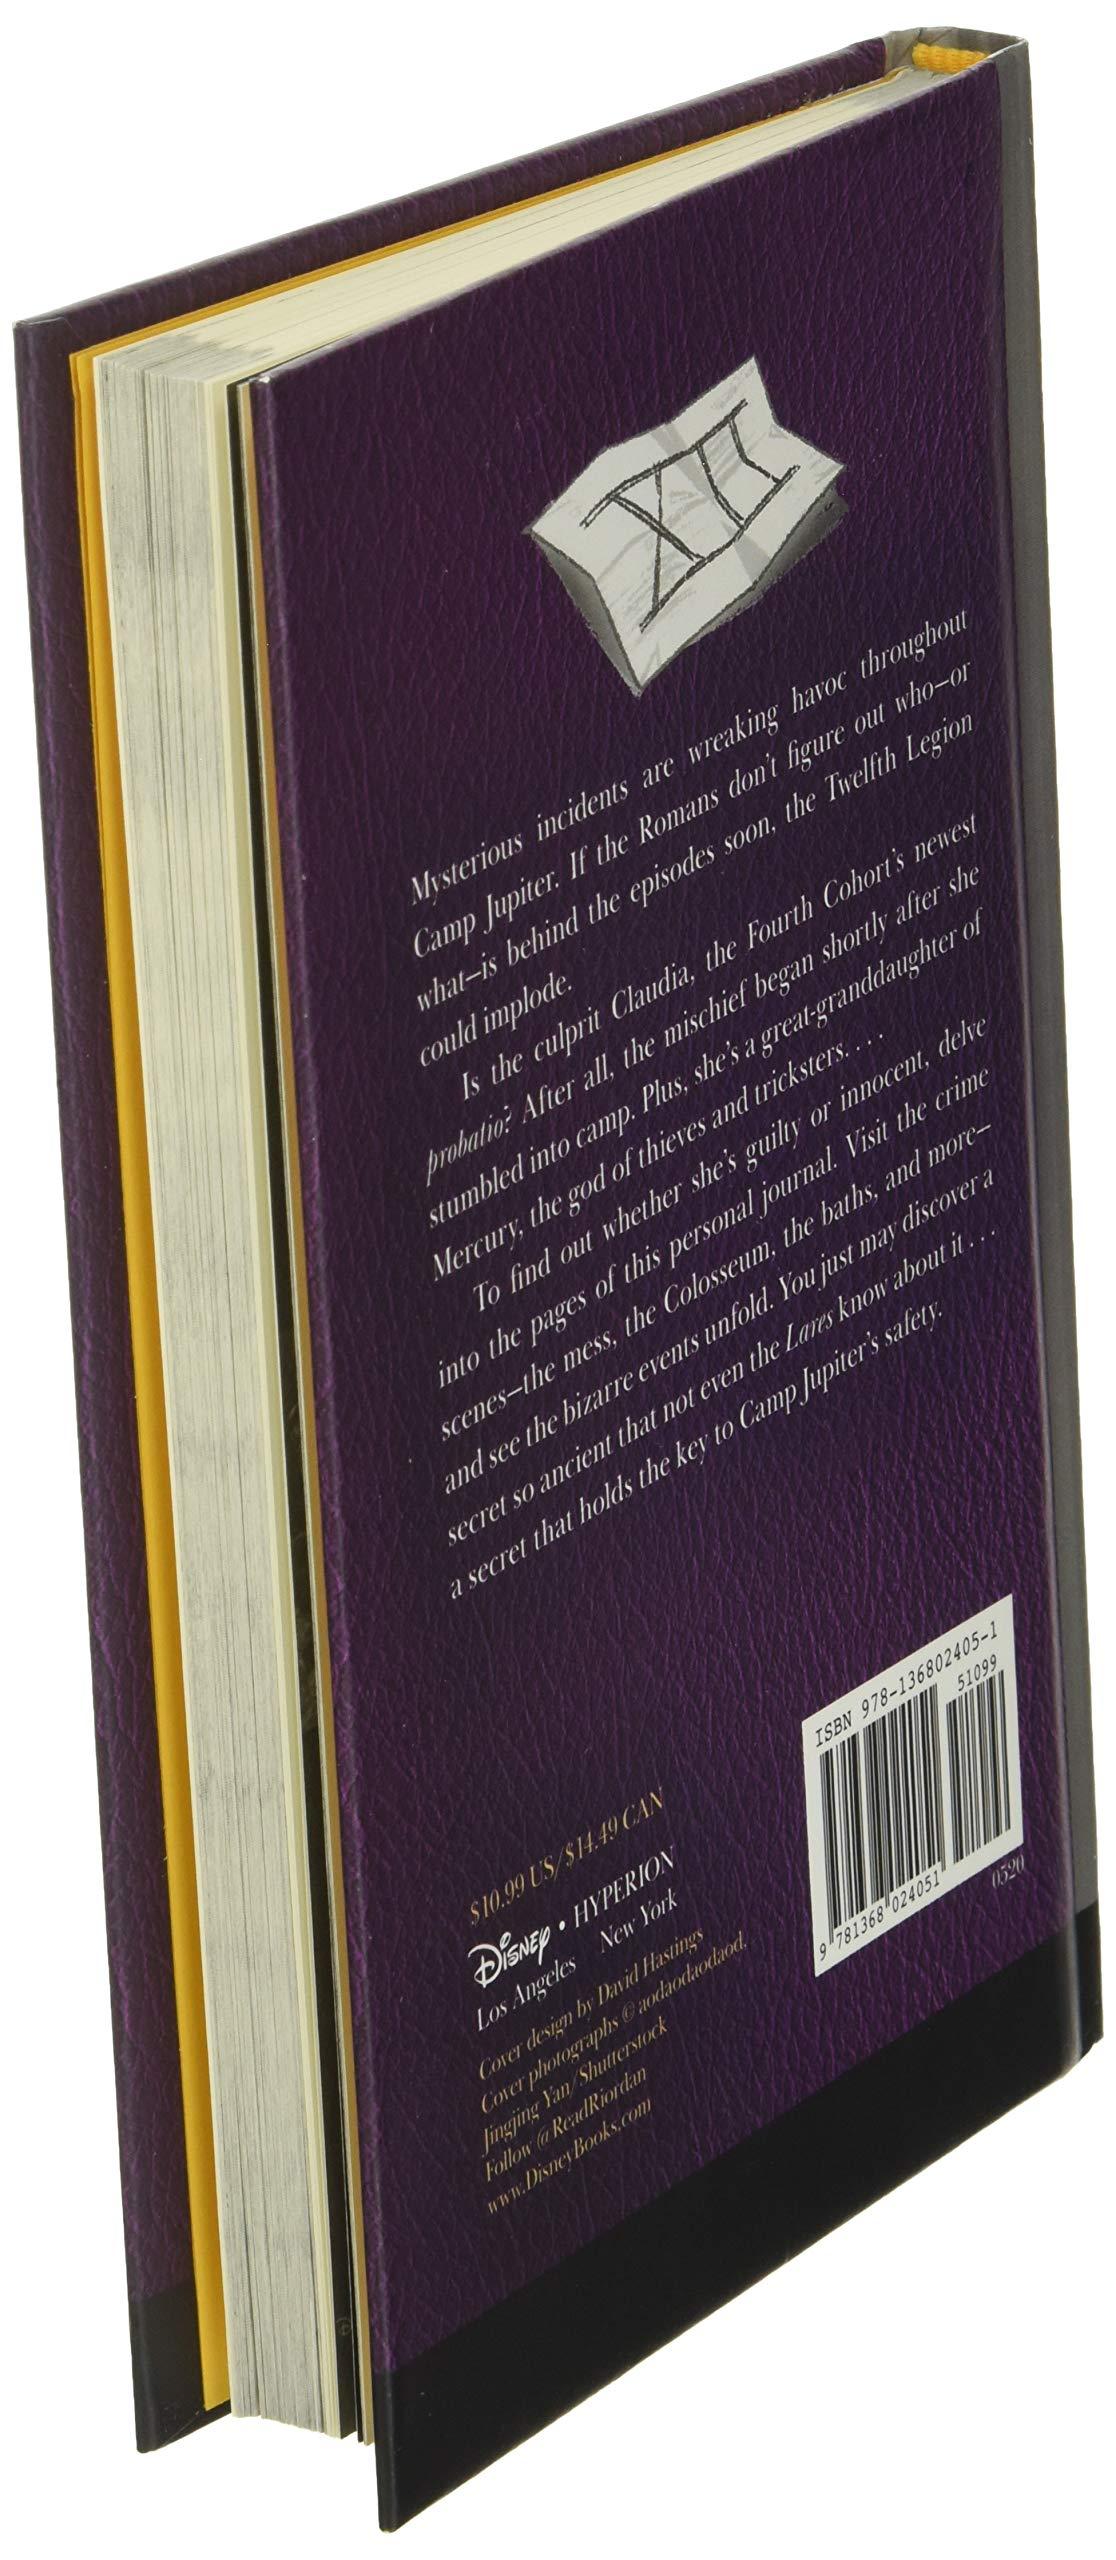 The Trials Of Apollo Camp Jupiter Classified (An Official Rick Riordan Companion Book): A Probatio's Journal